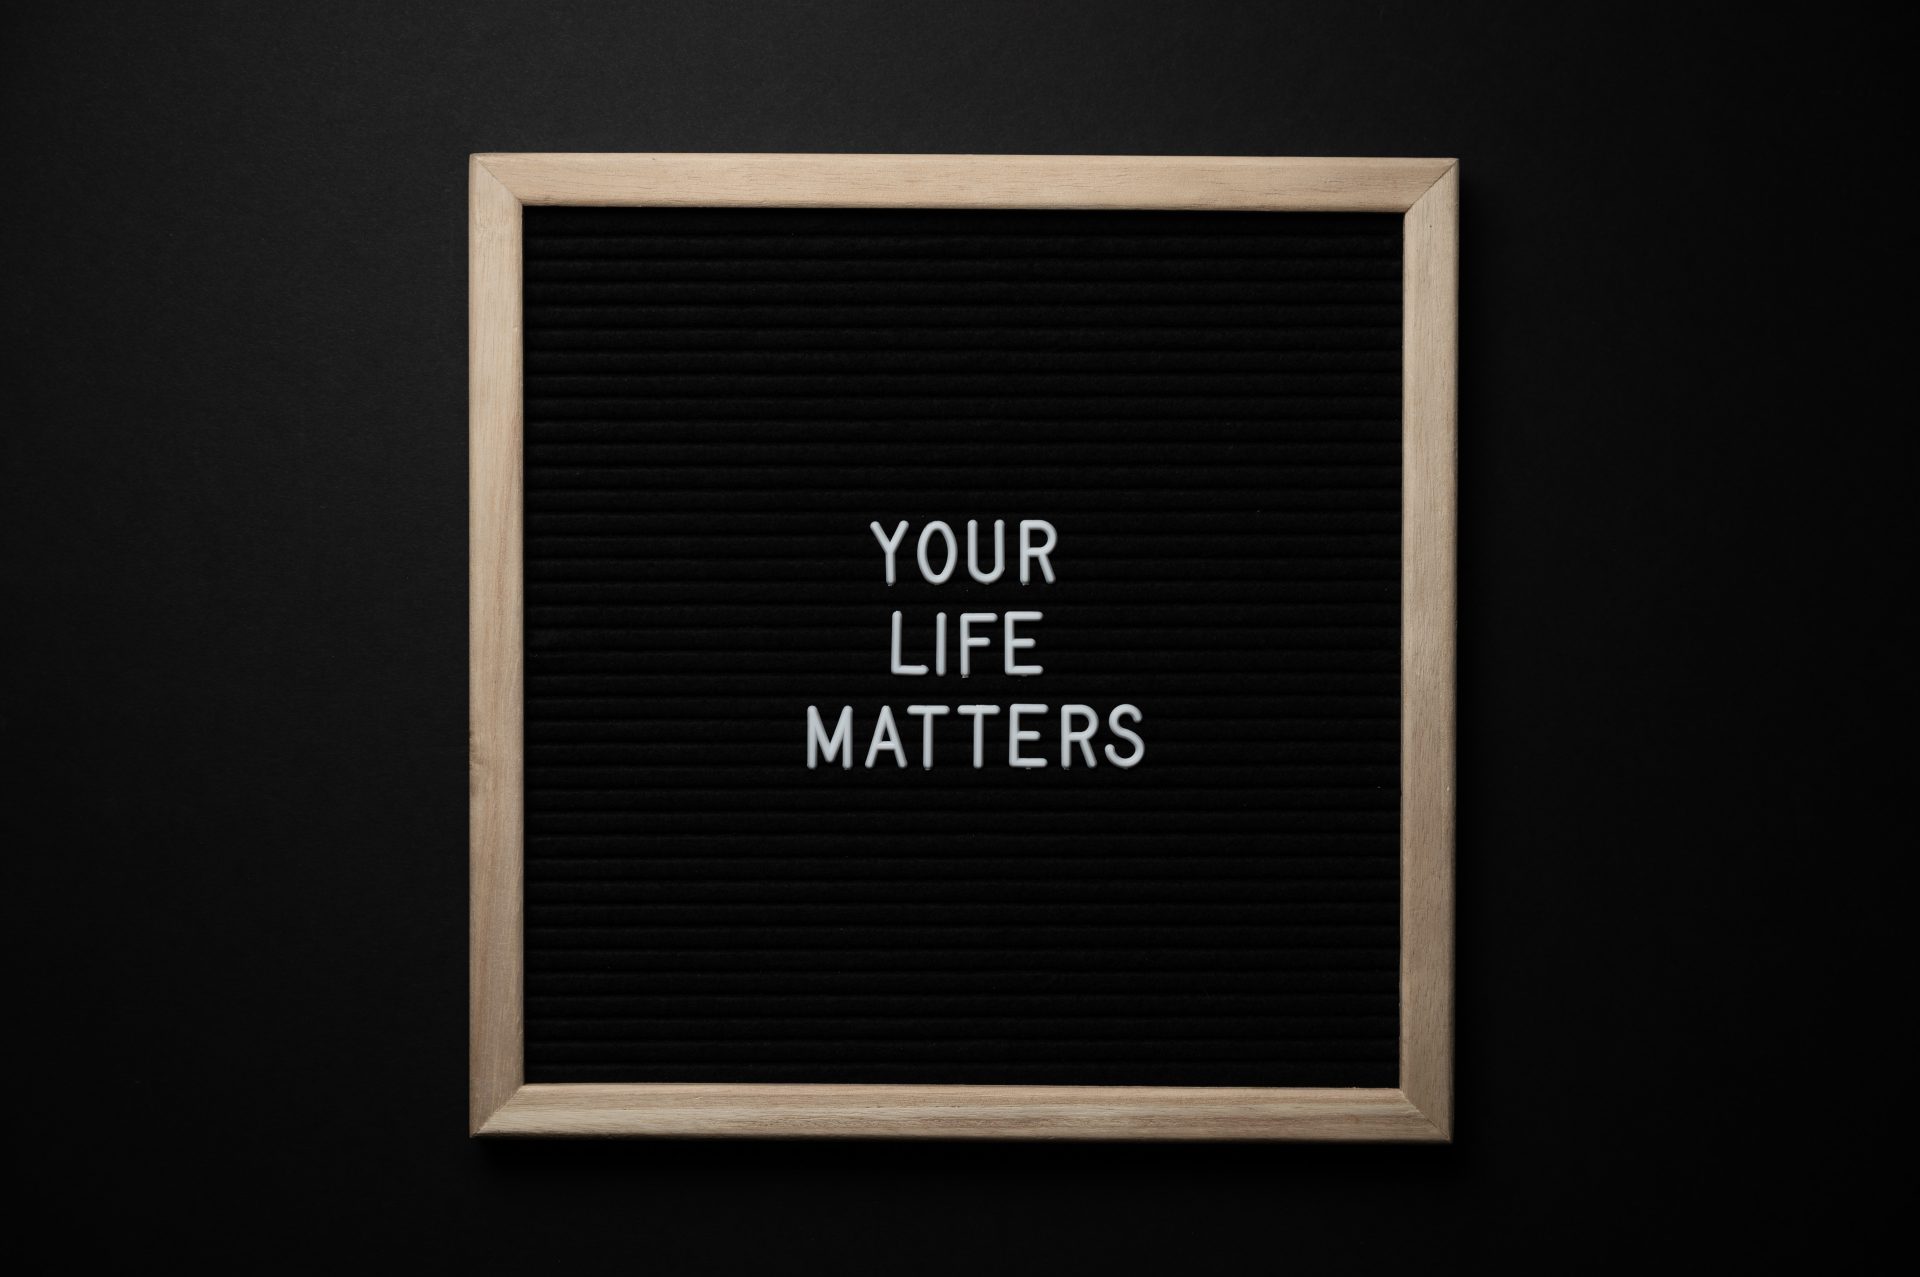 Black sign board with white text that says, "YOUR LIFE MATTERS"